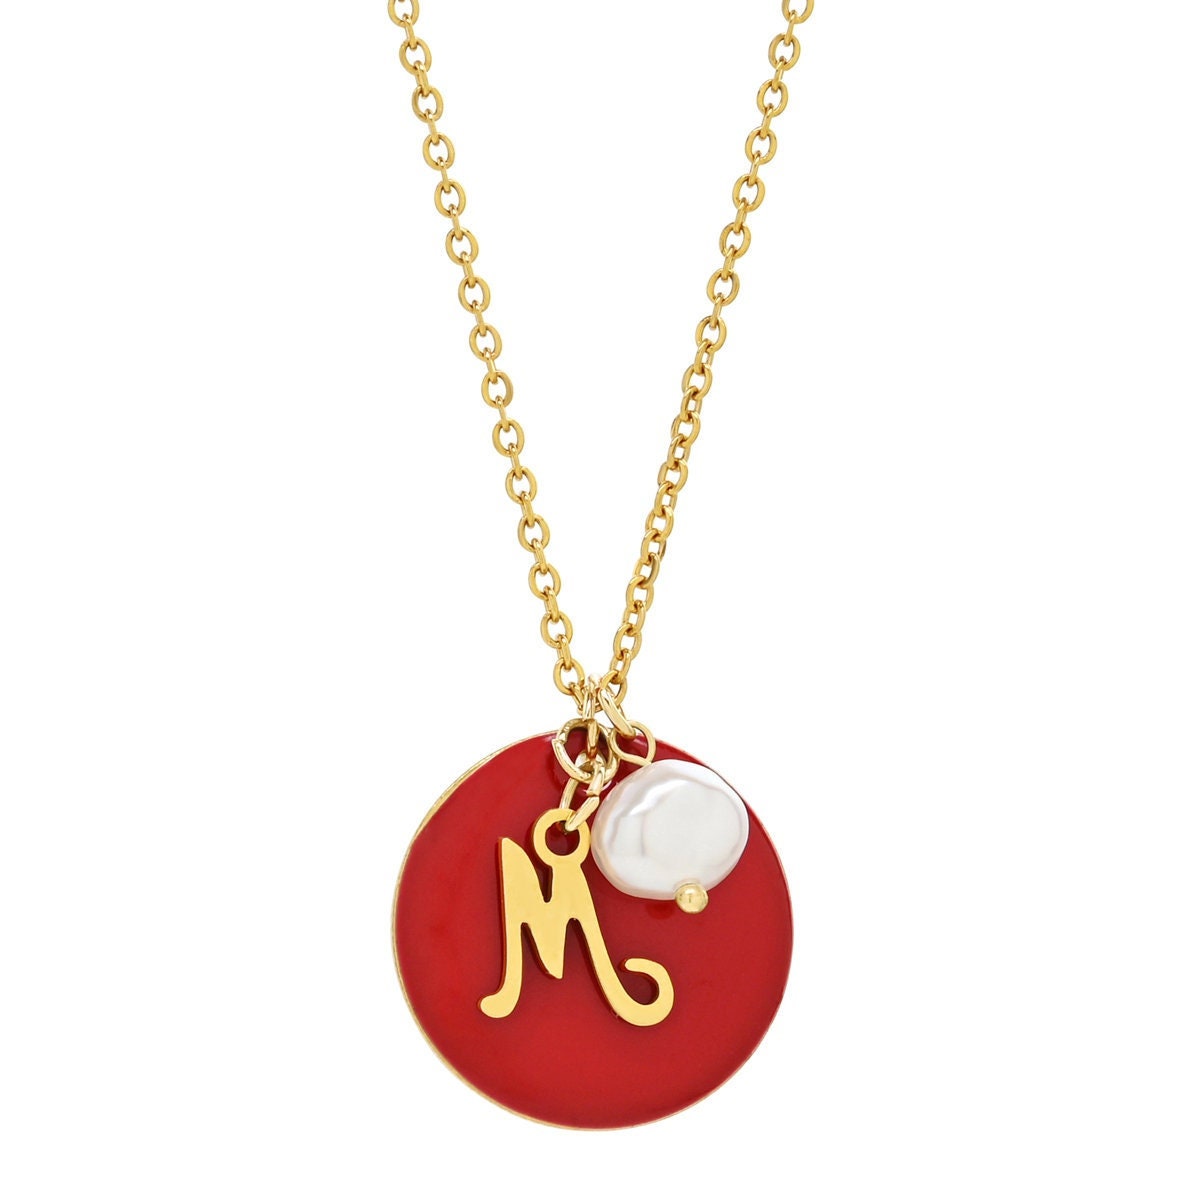 gold initial necklace. | Nordstrom